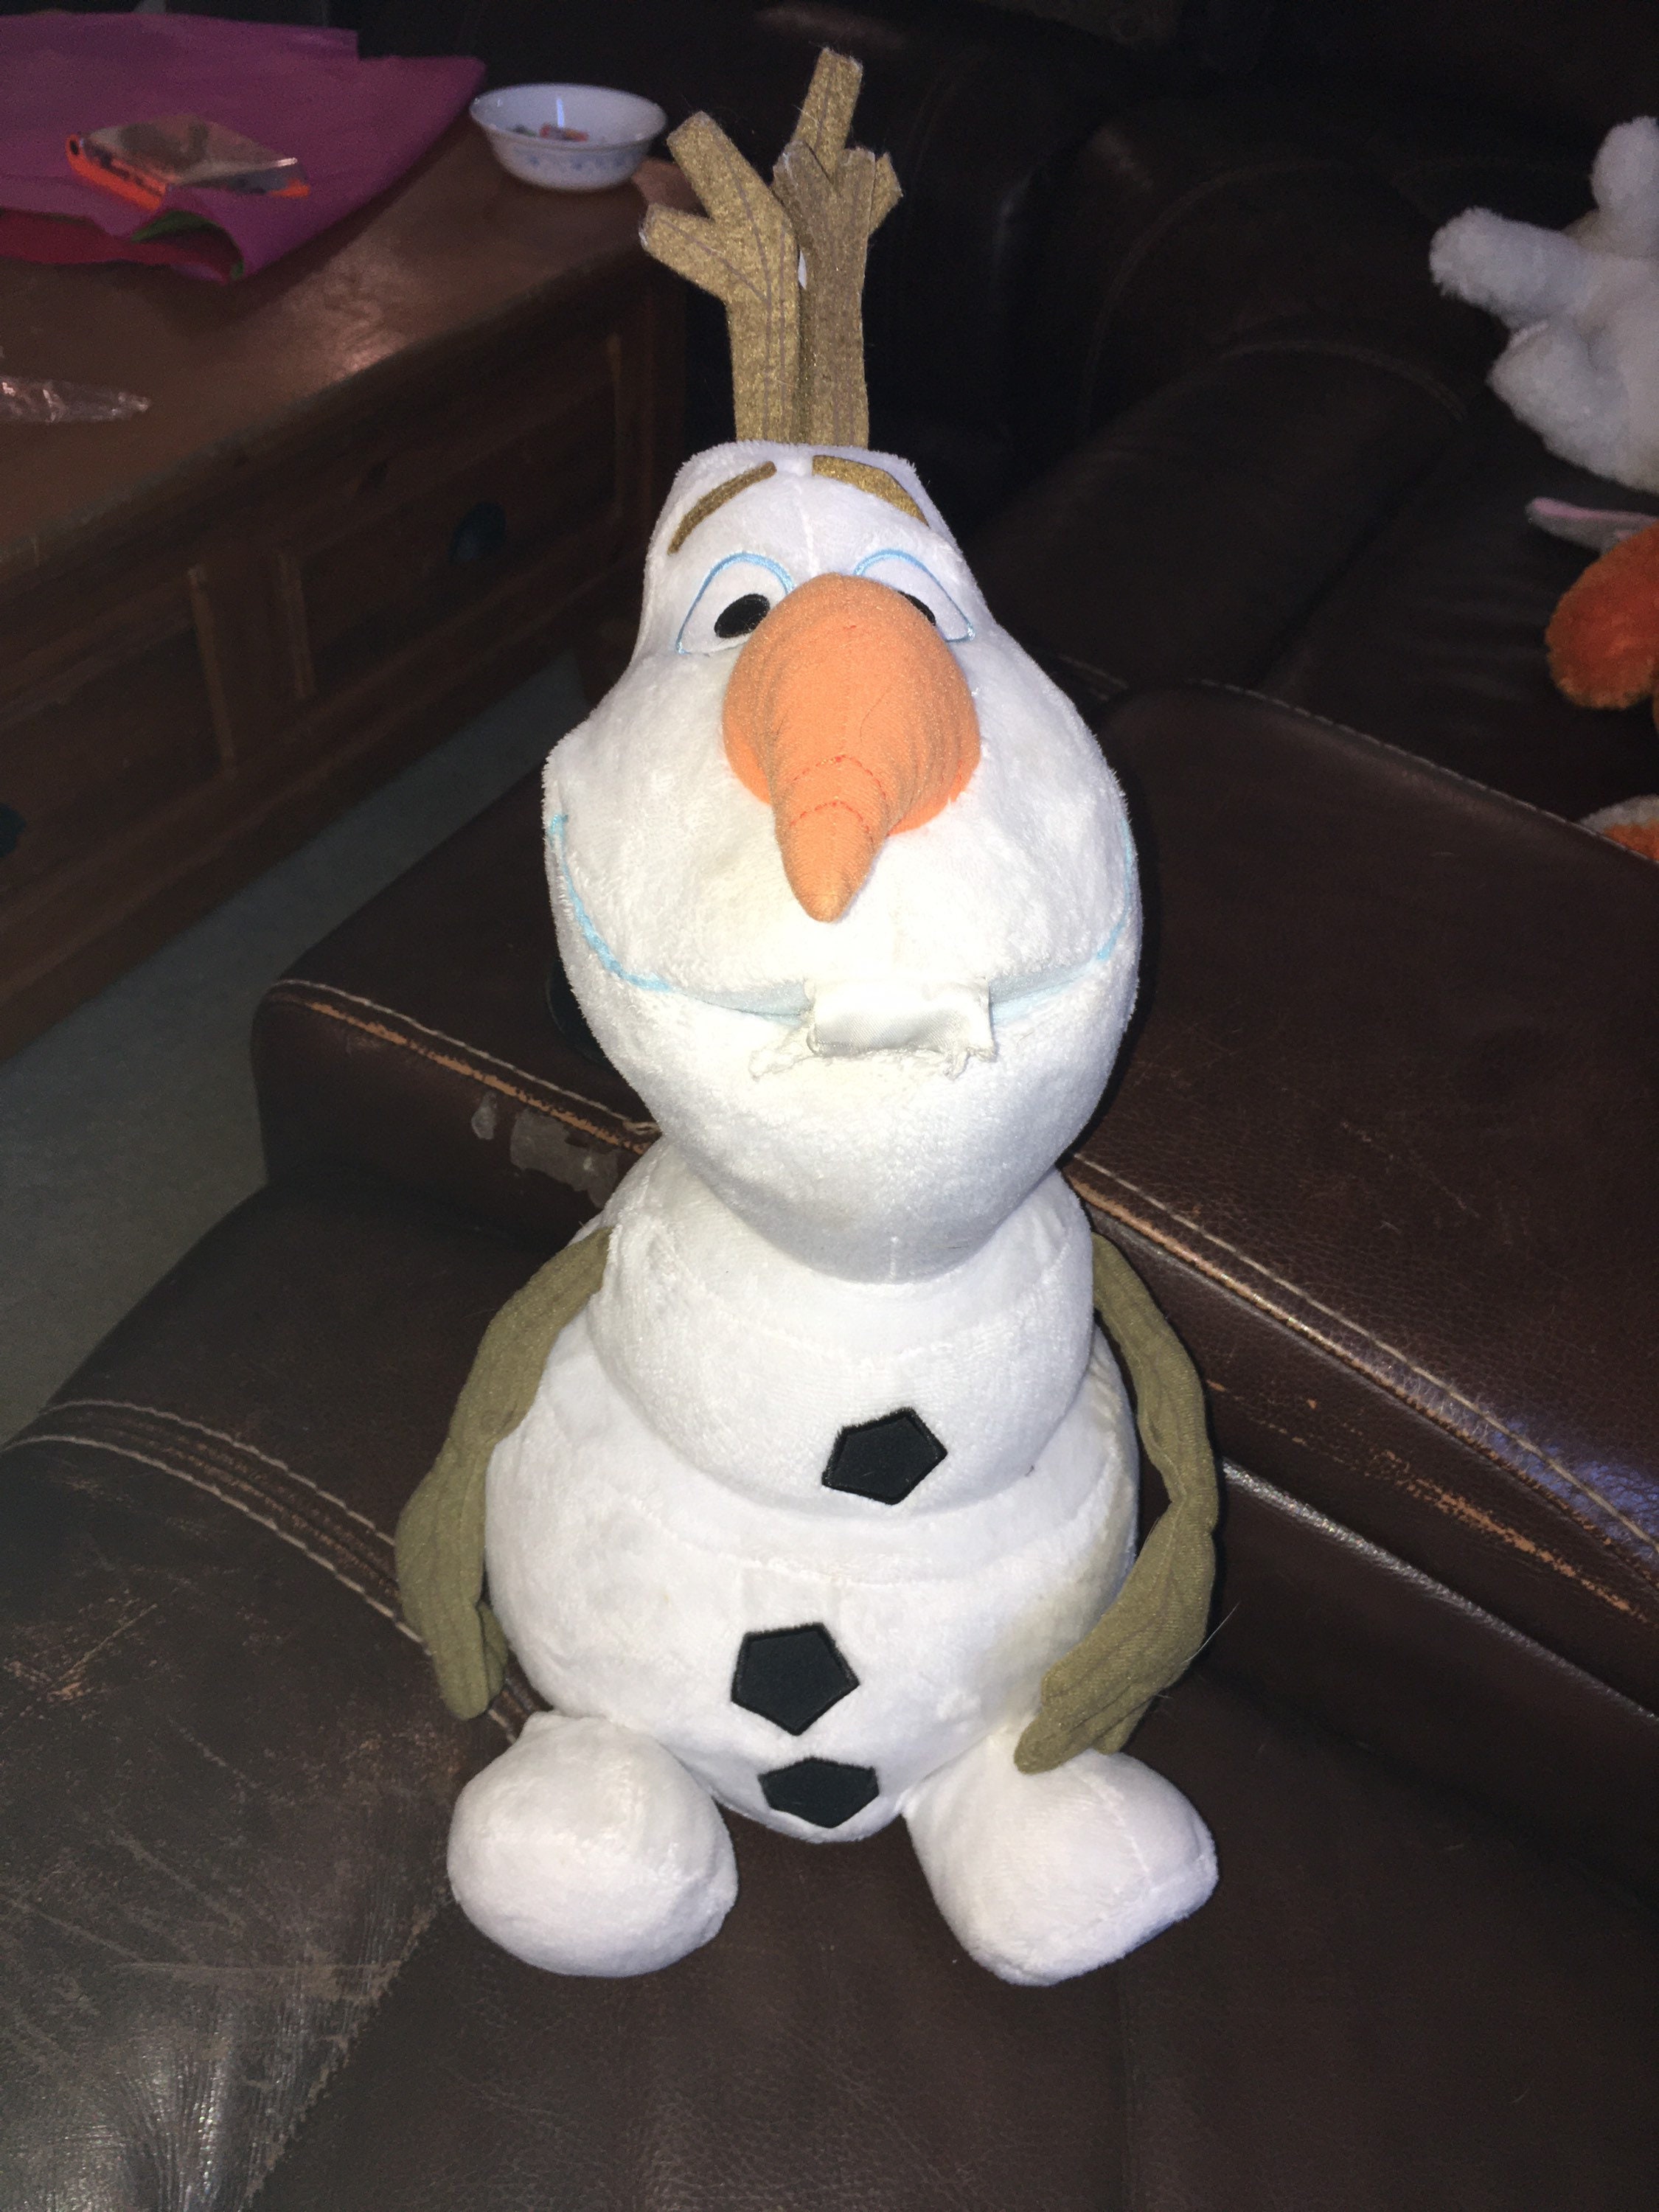 Giant Disney Olaf Frozen Plush Stuffed Animal, About 21'' Almost 2 Feet  Tall!